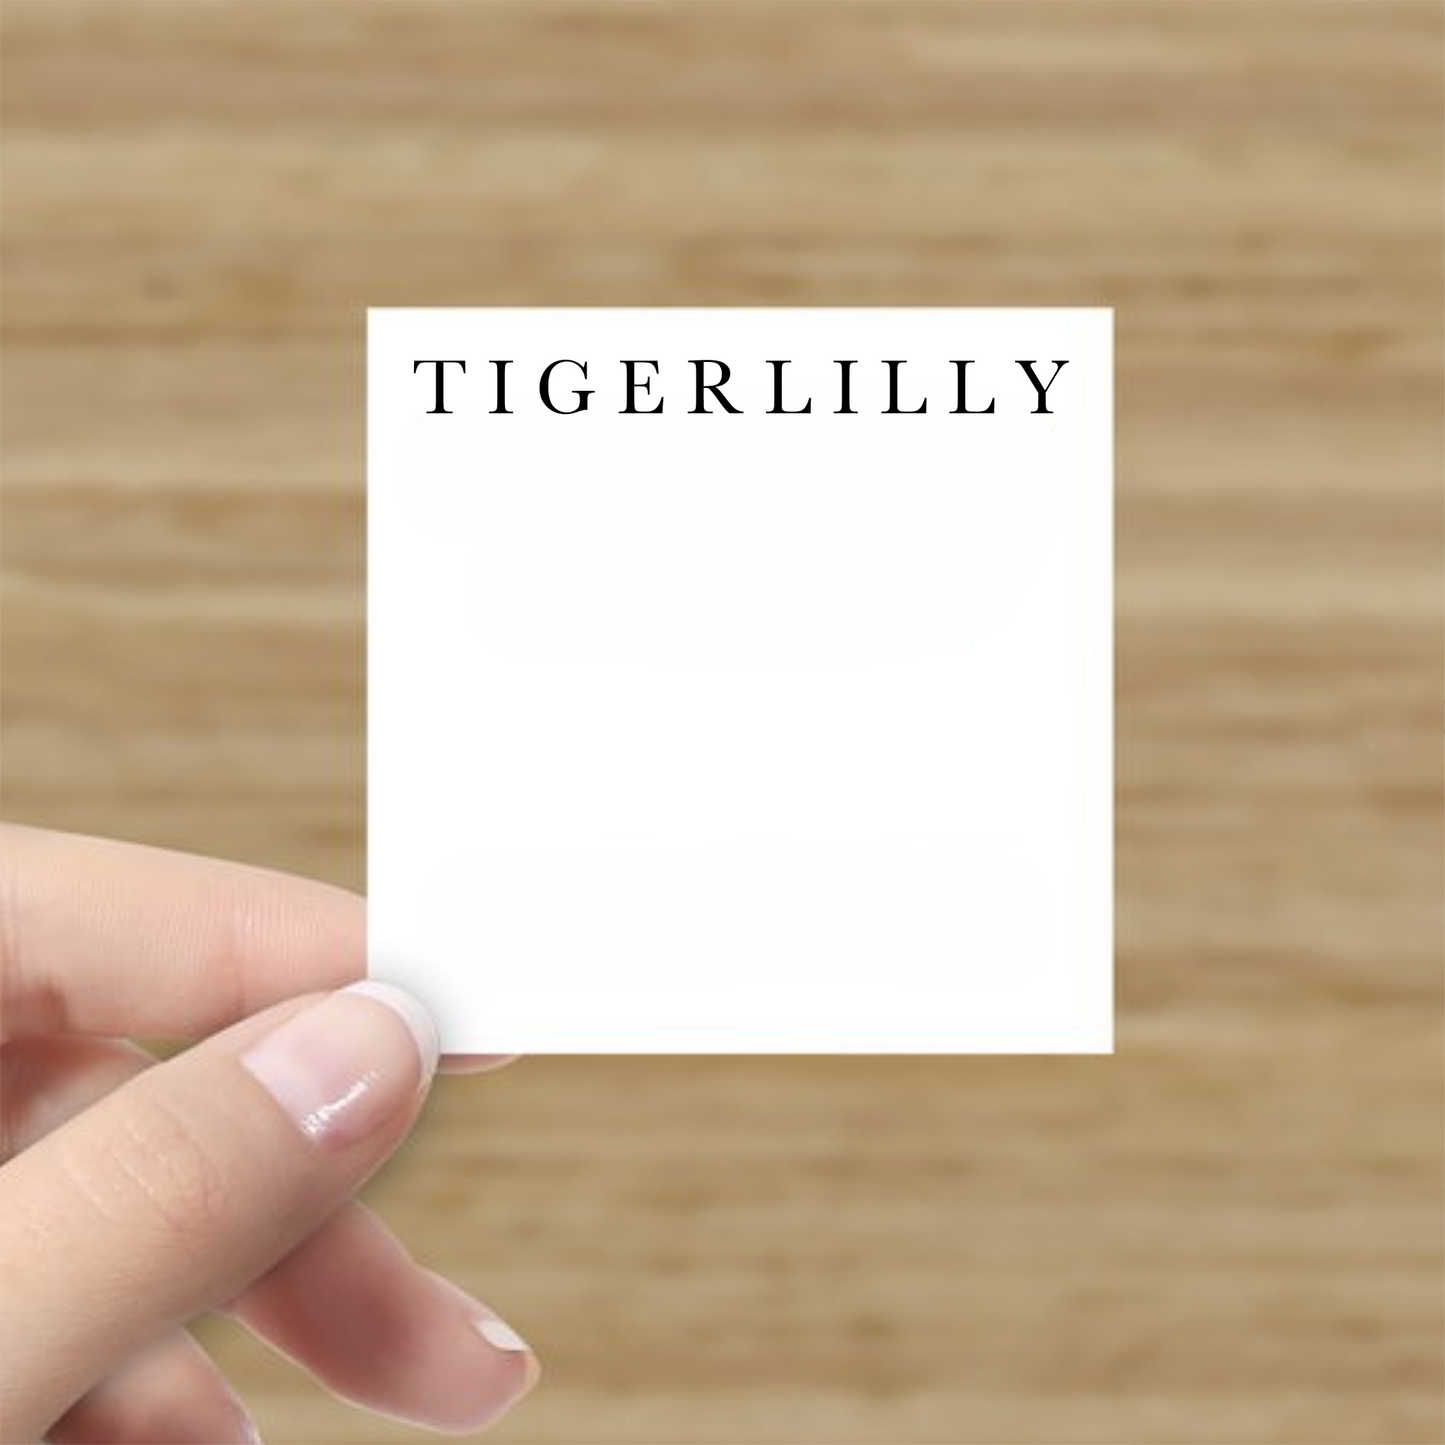 Tigerlilly Jewelry branded earring display card